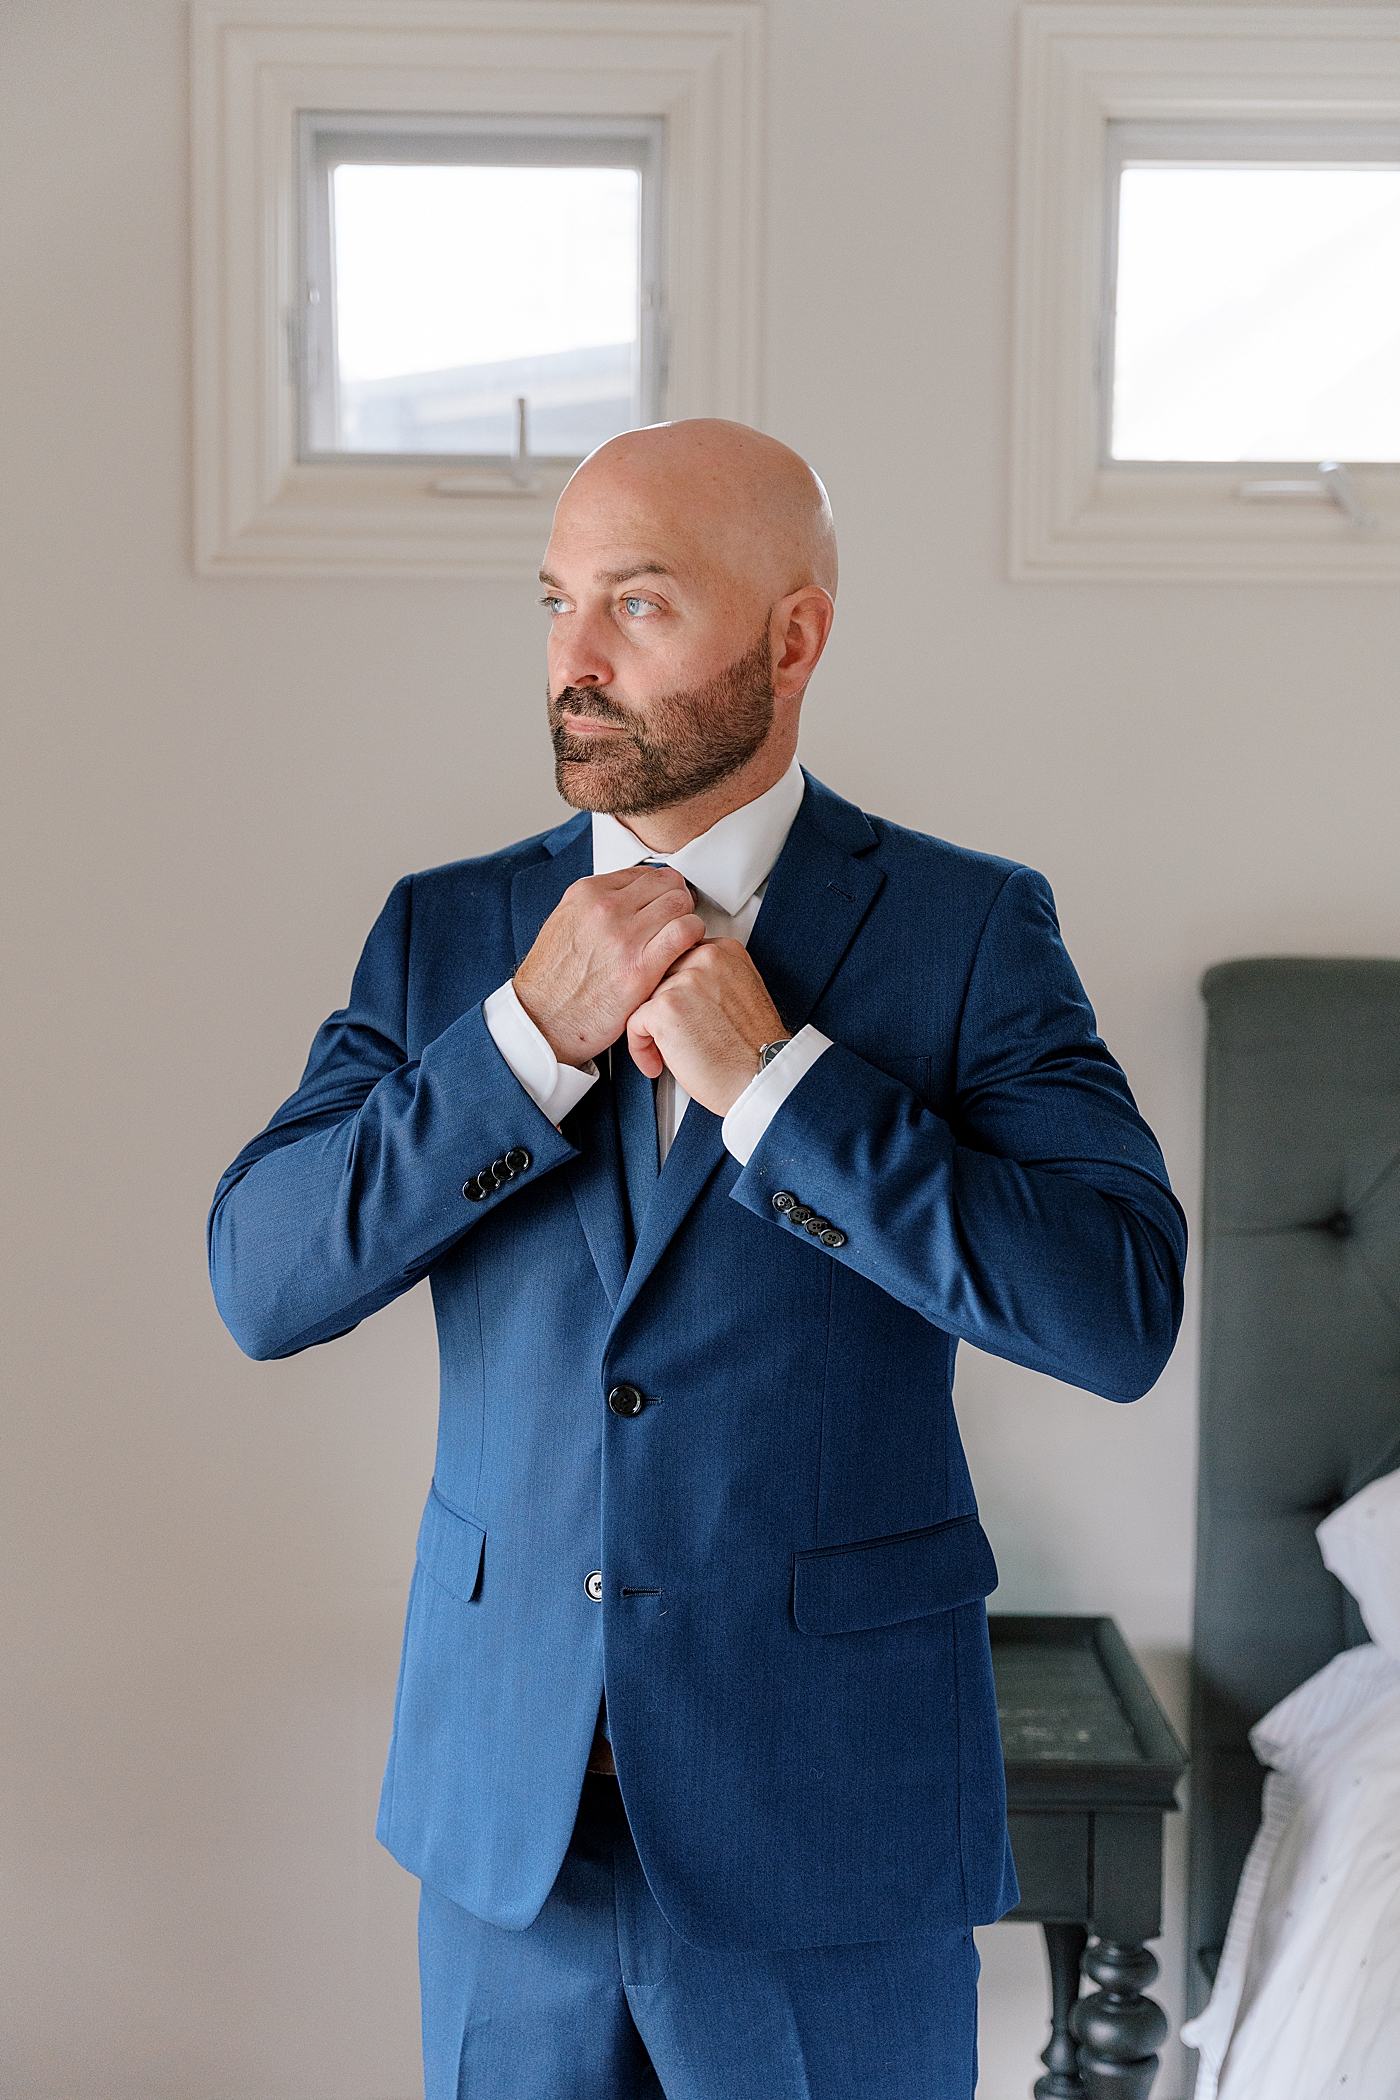 Groom in a navy suit looking towards window while fixing his tie | Image by Hope Helmuth Photography